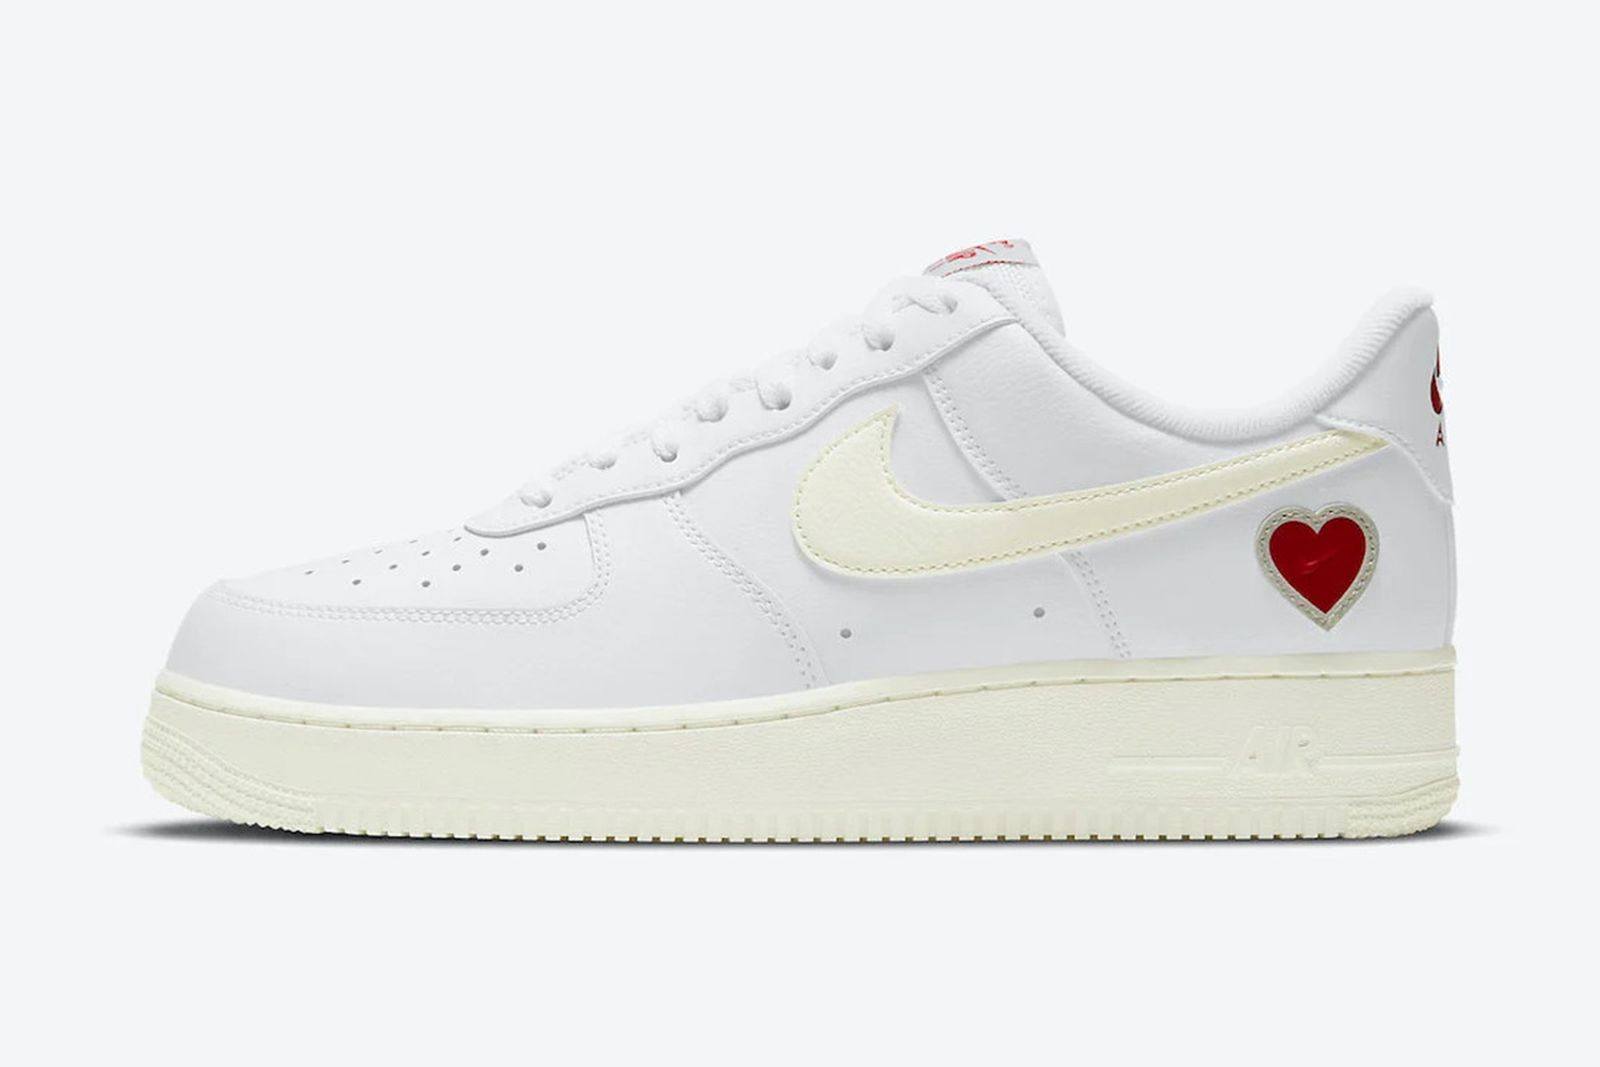 Nike Air af1 valentines day 2021 Force 1 Valentine's Day 2021: Rumored Release Info